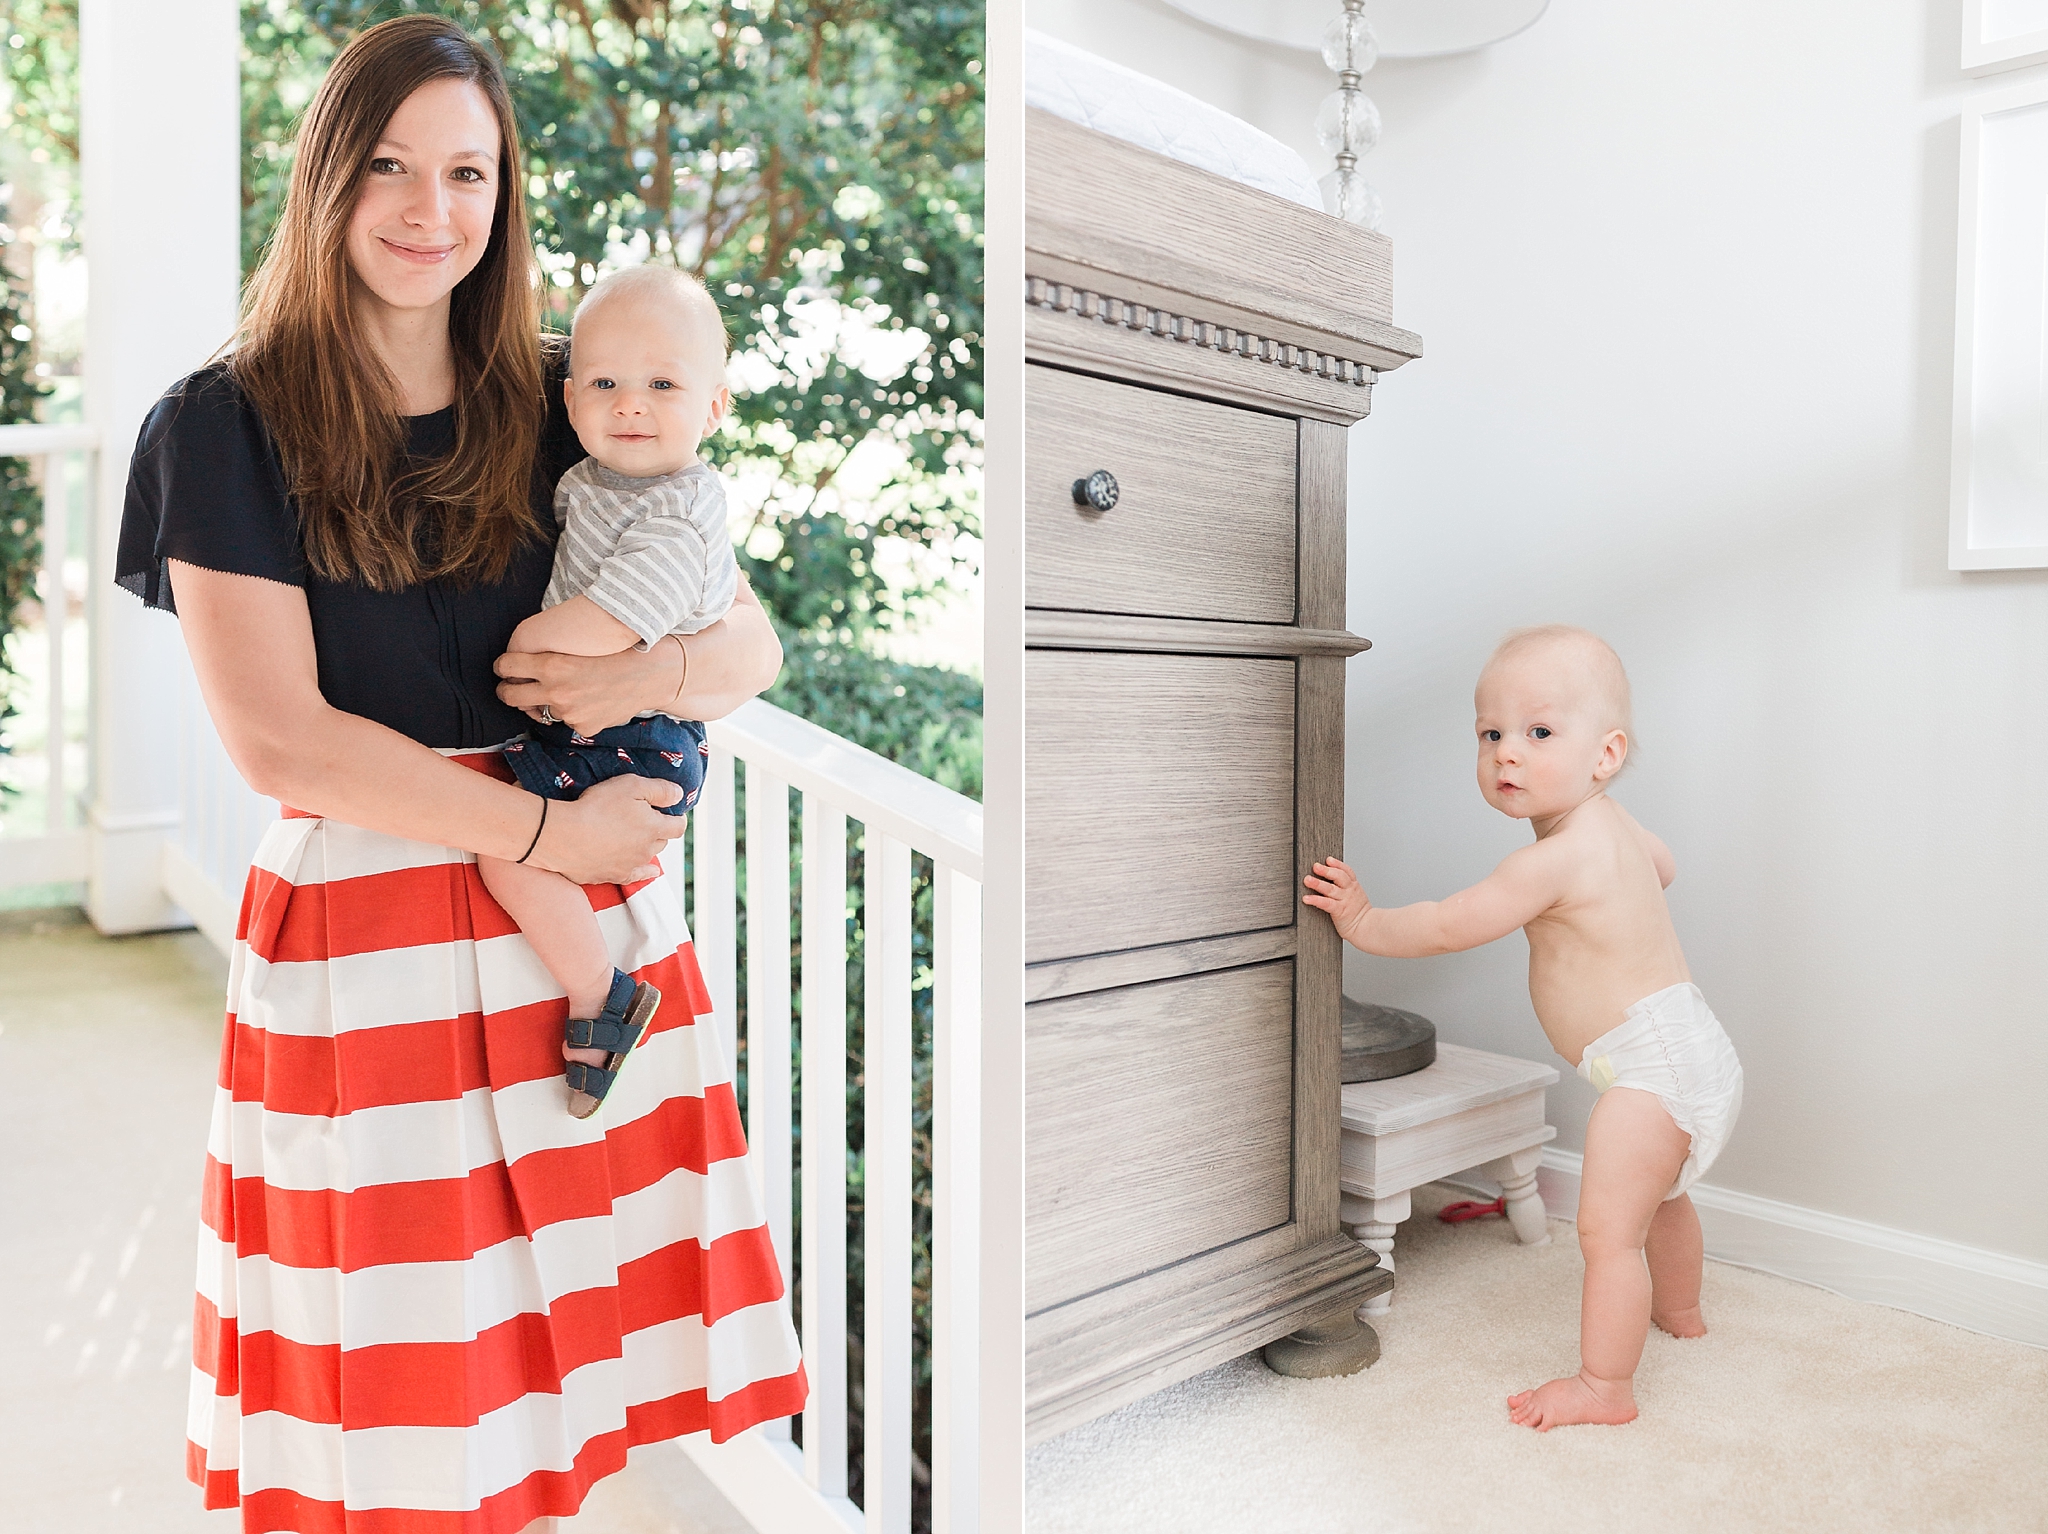 This DC wedding photographer shares personal photos of her new son, Landon James, from months seven through nine of his life.